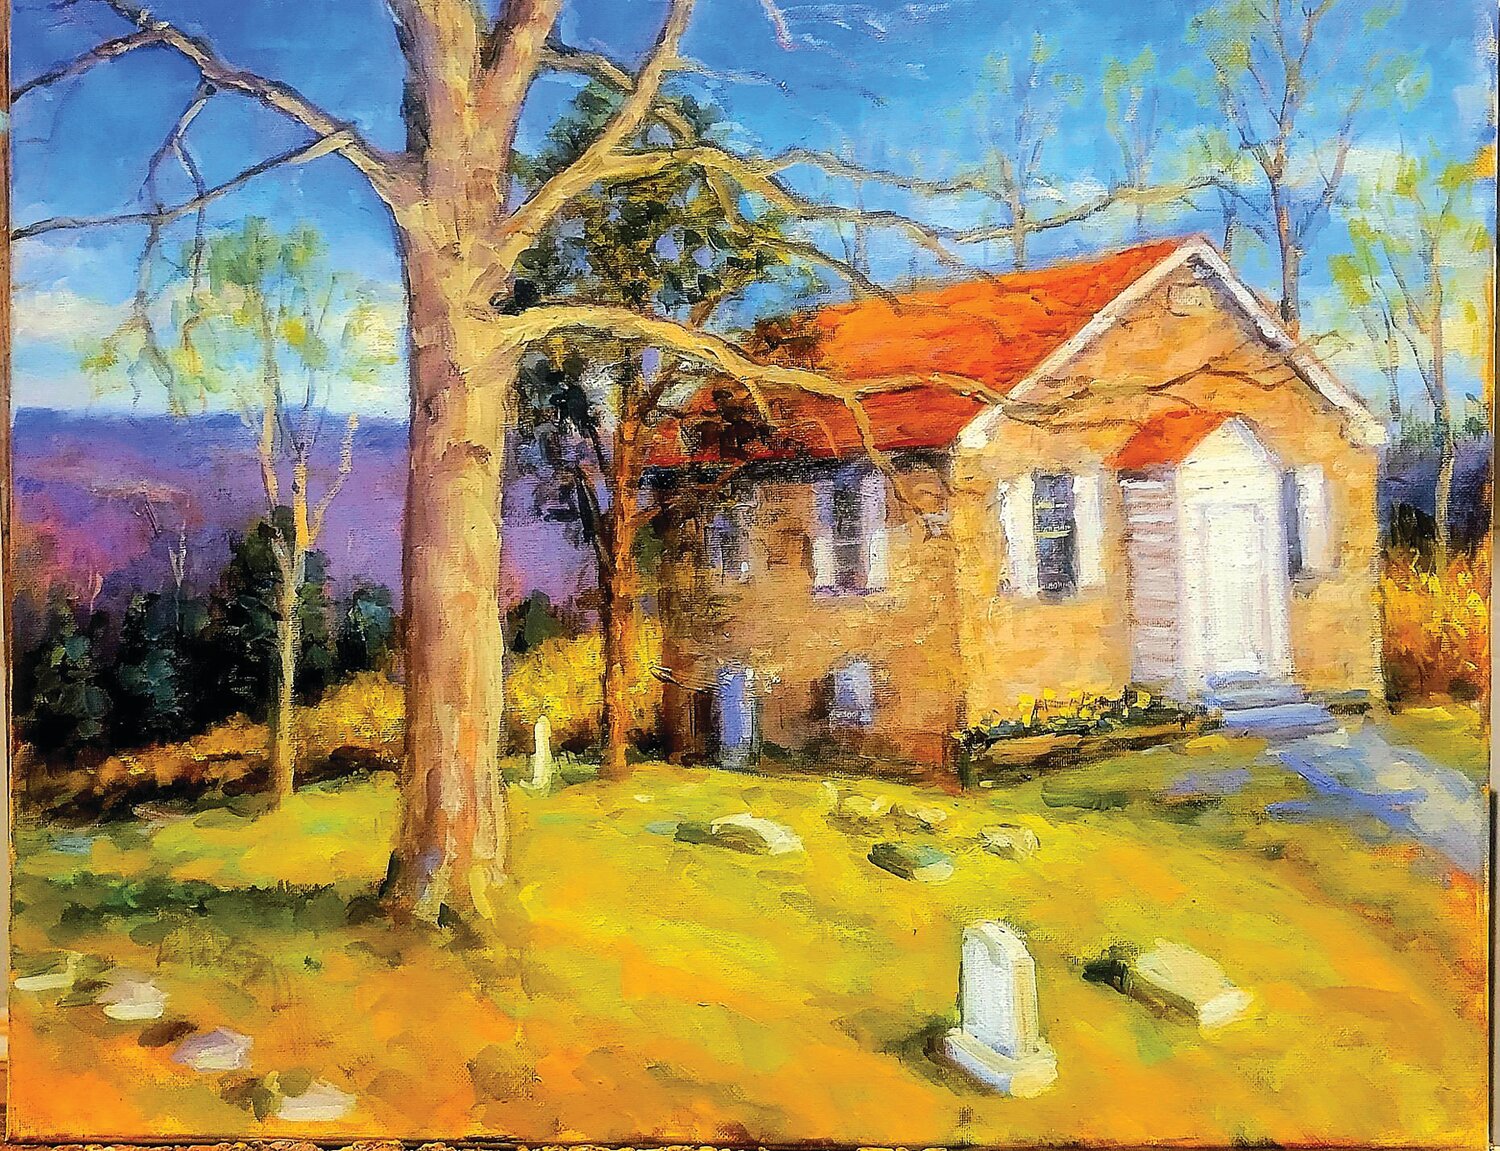 Jim Lukens’ painting of Mount Gilead Church on Buckingham Mountain is being auctioned off to benefit the historic church’s restoration.